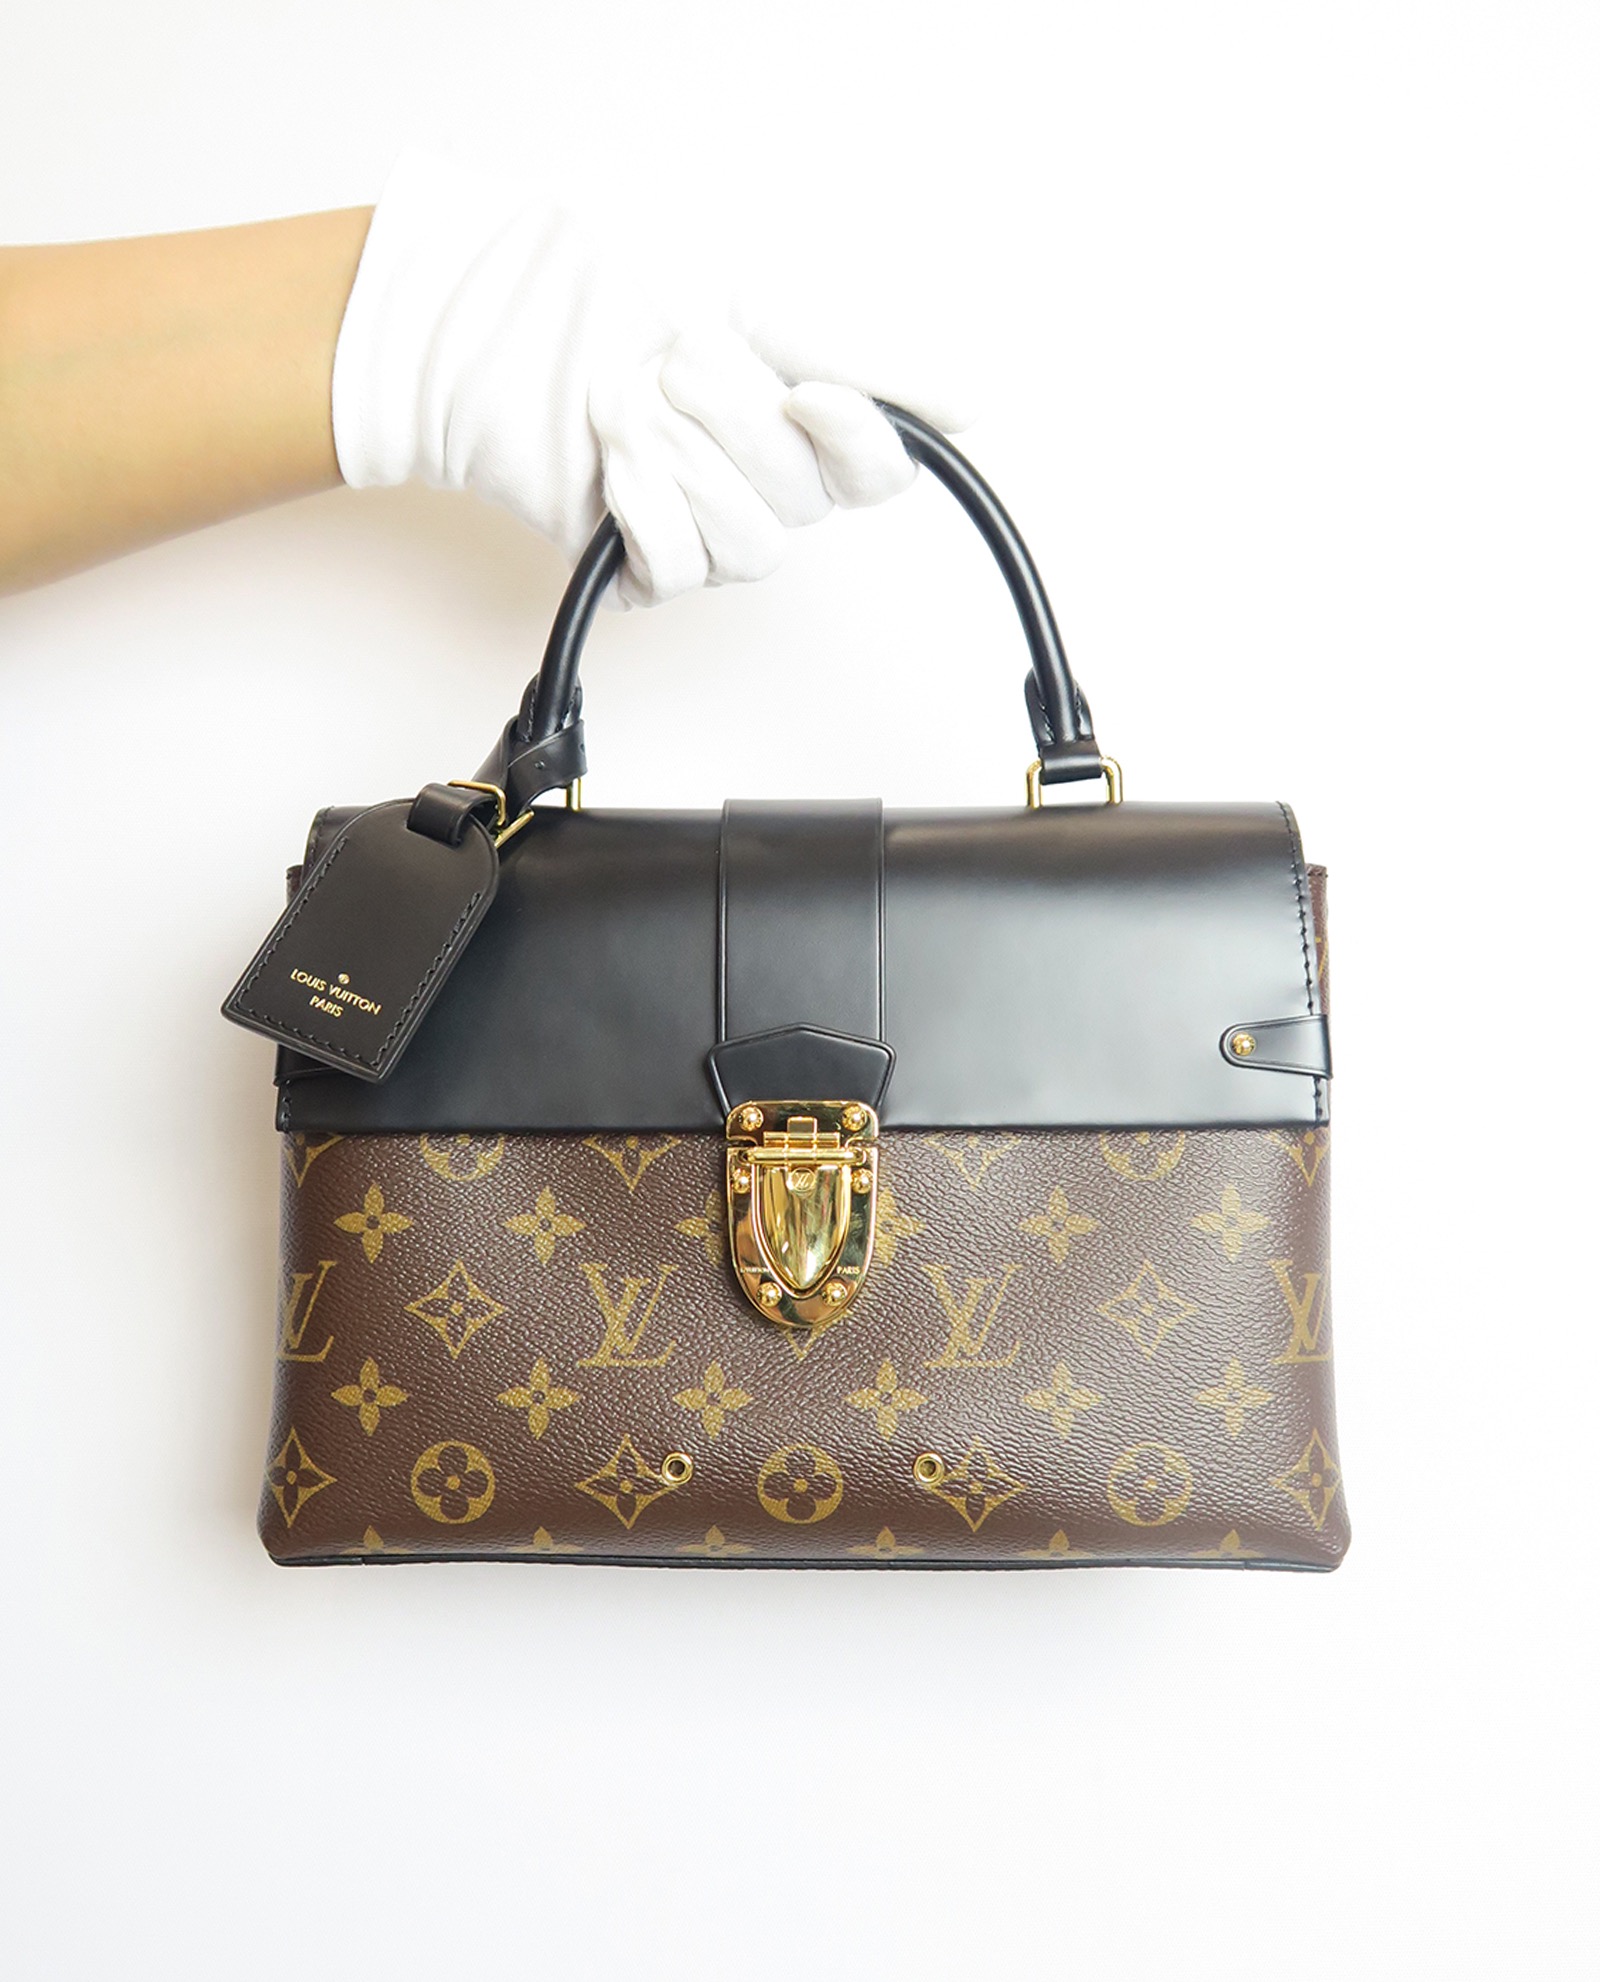 one handle lv